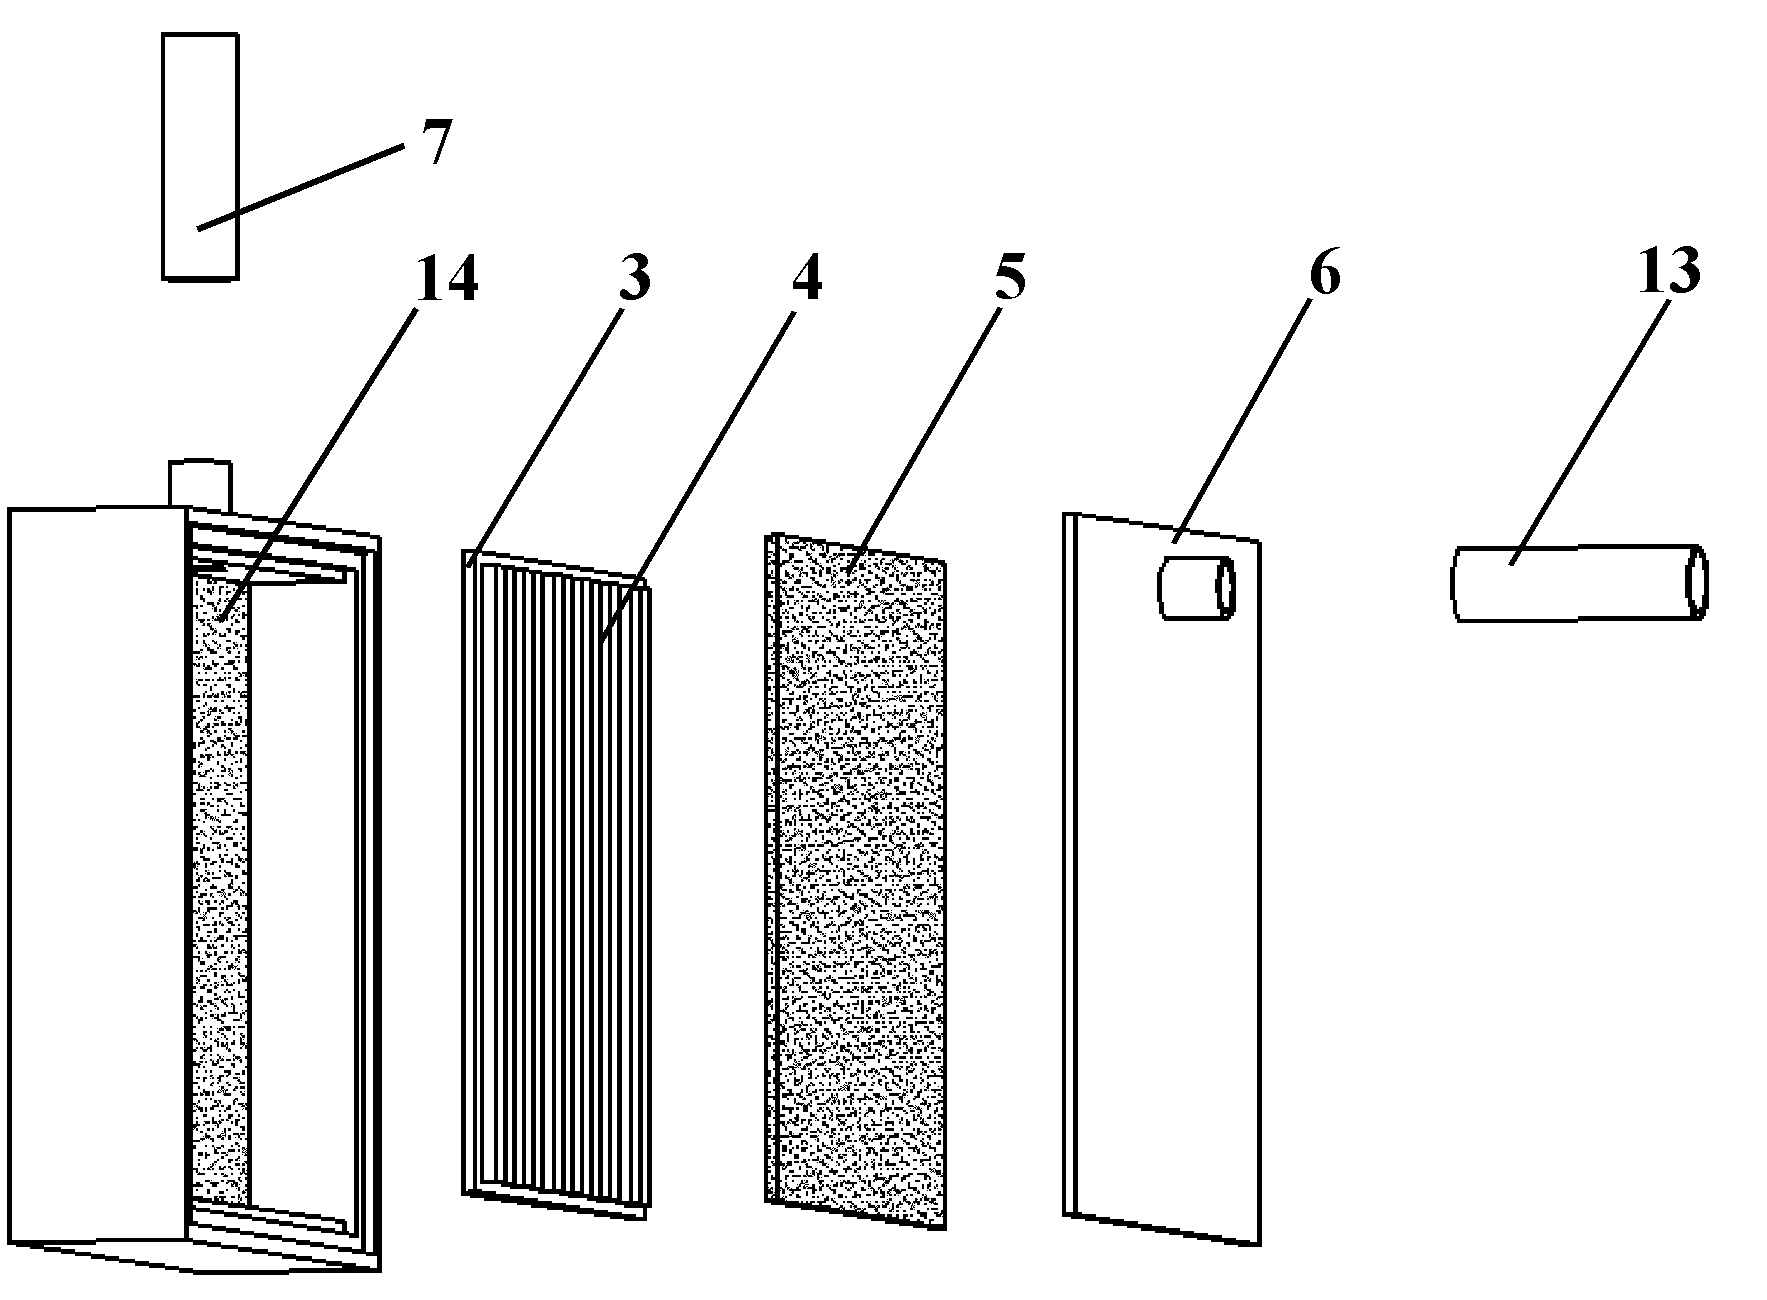 Micro LHP radiating system for integrated electrofluid power pump